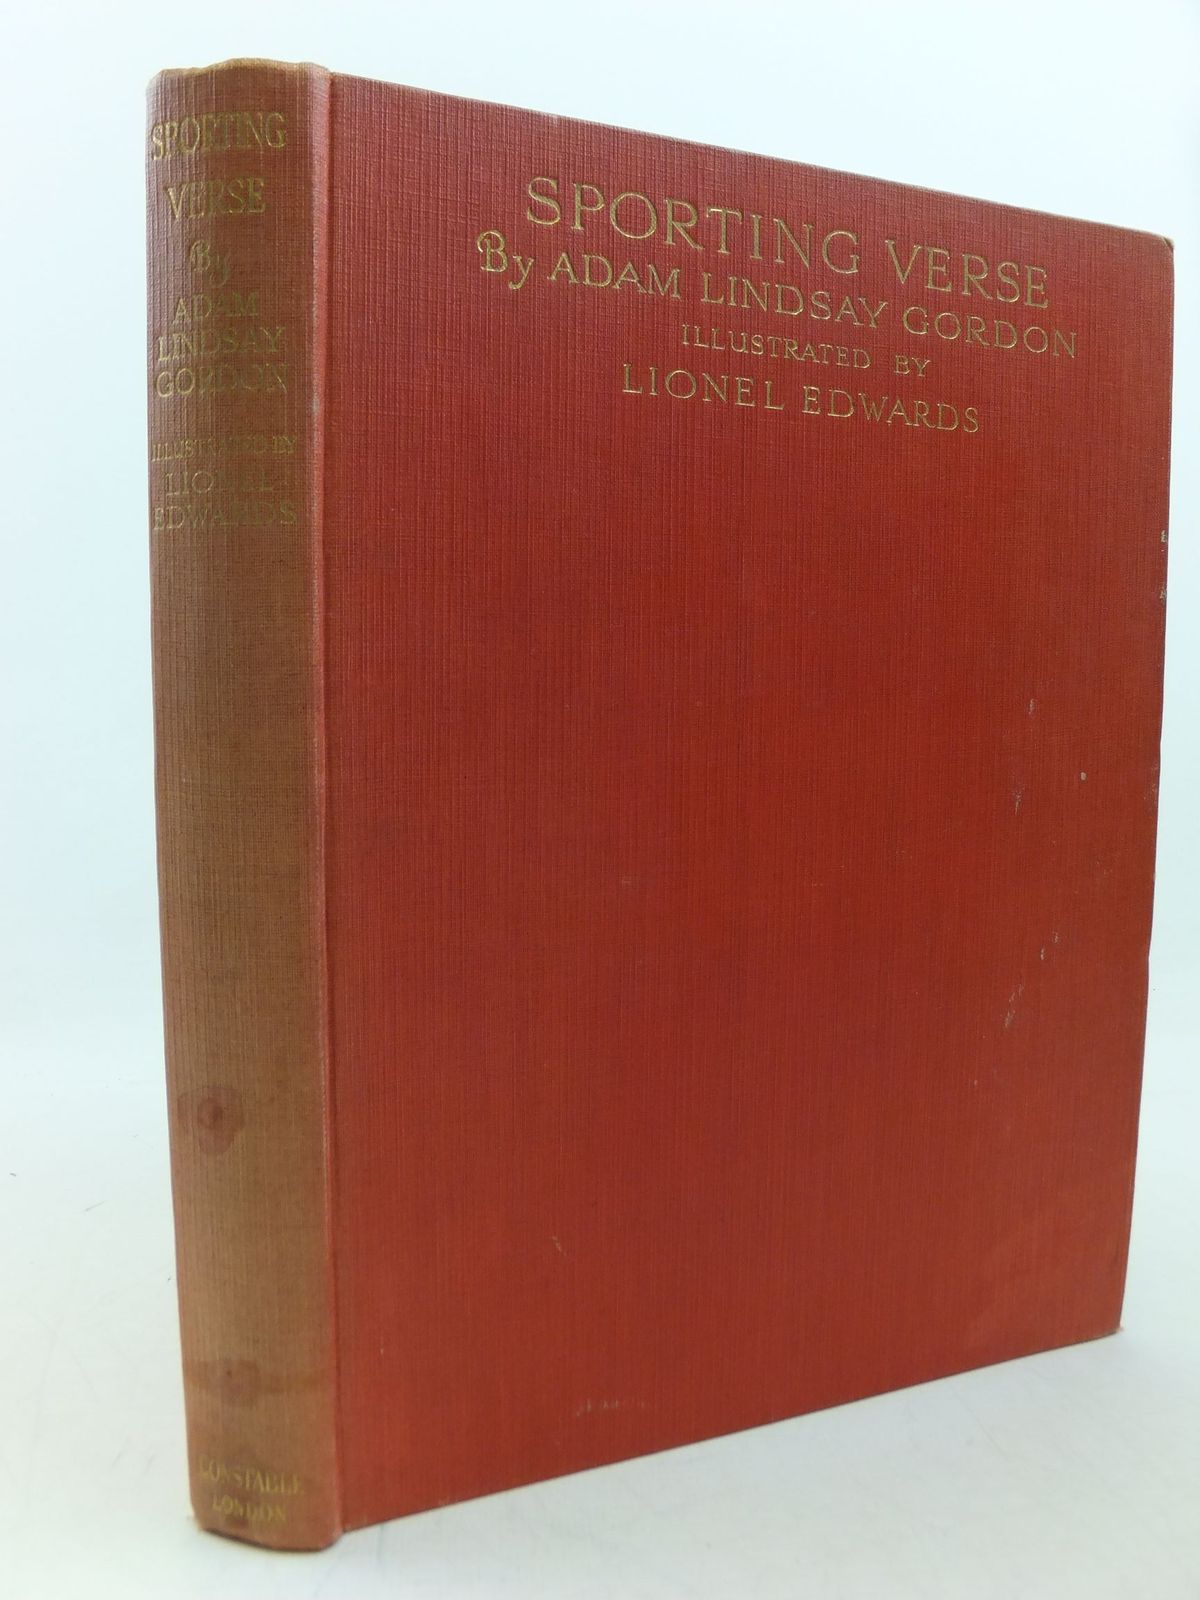 Photo of SPORTING VERSE written by Gordon, Adam Lindsay illustrated by Edwards, Lionel published by Constable & Co. Ltd. (STOCK CODE: 2113378)  for sale by Stella & Rose's Books